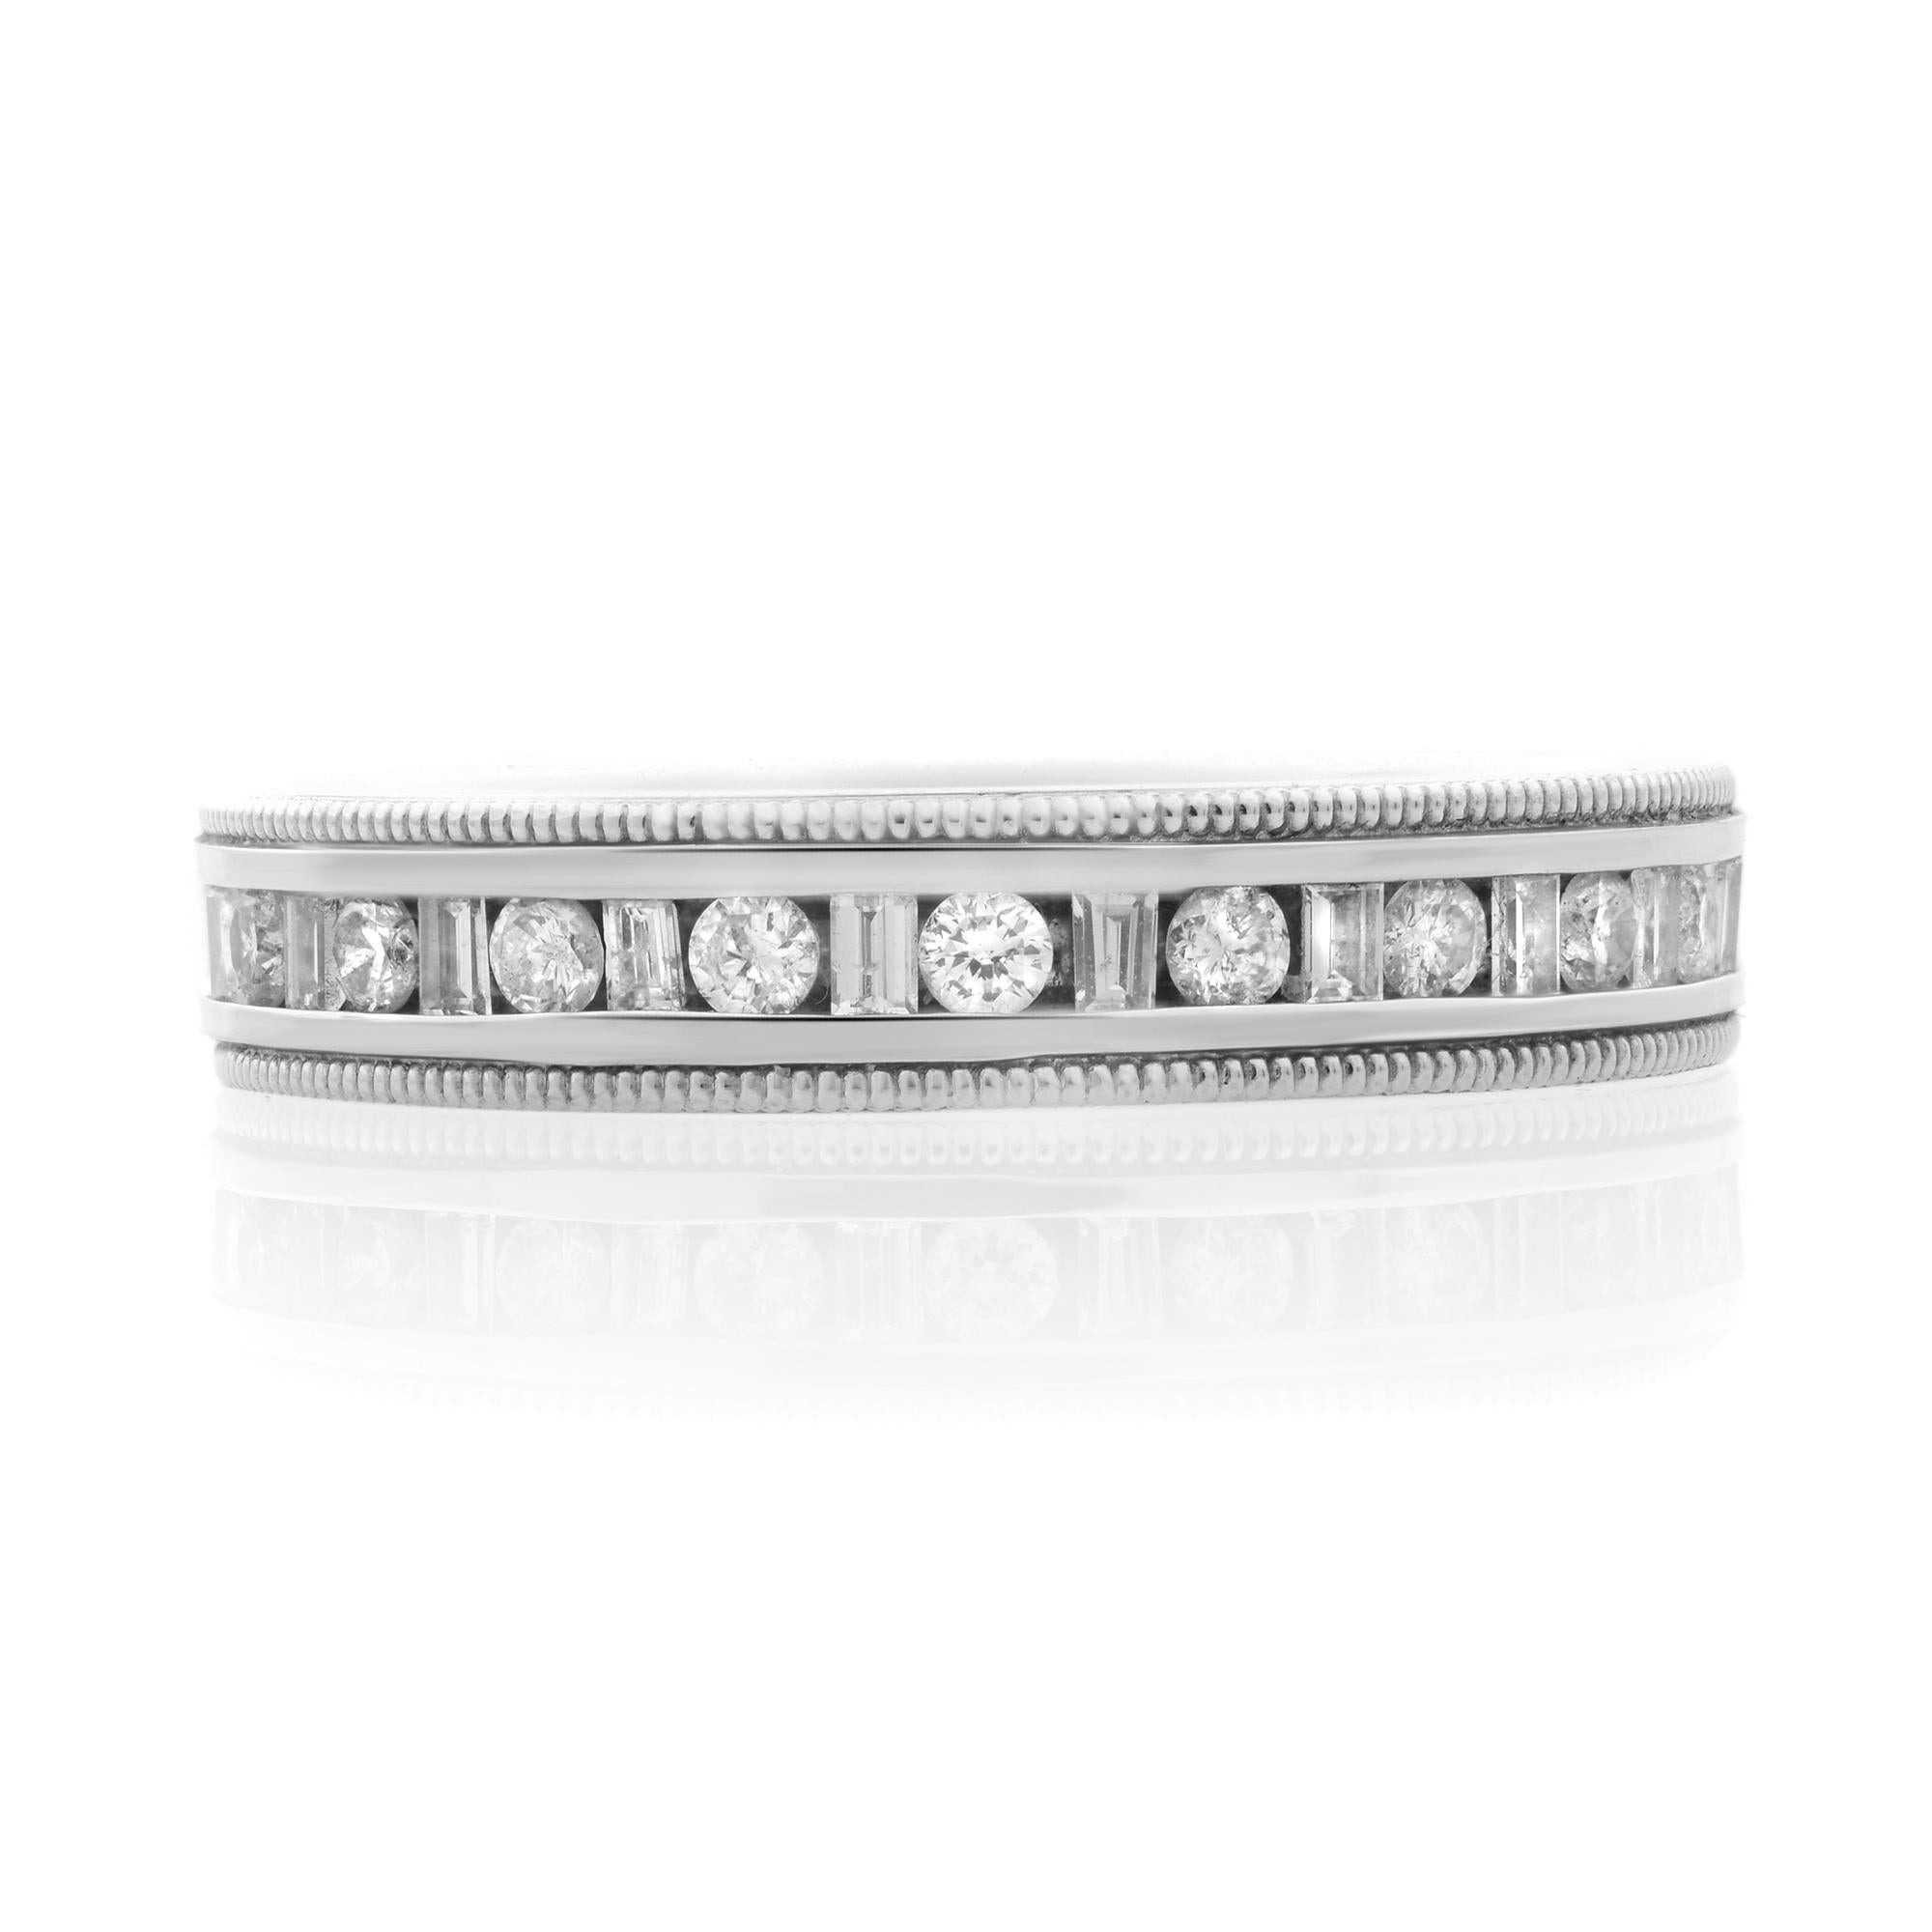 Classic and elegant diamond wedding band rendered in highly polished 14k white gold. This ring features 19 channel set baguette and round brilliant cut diamonds totaling 0.40 carat. Diamond quality: G color and VS-SI clarity. Ring size: 7. Ring